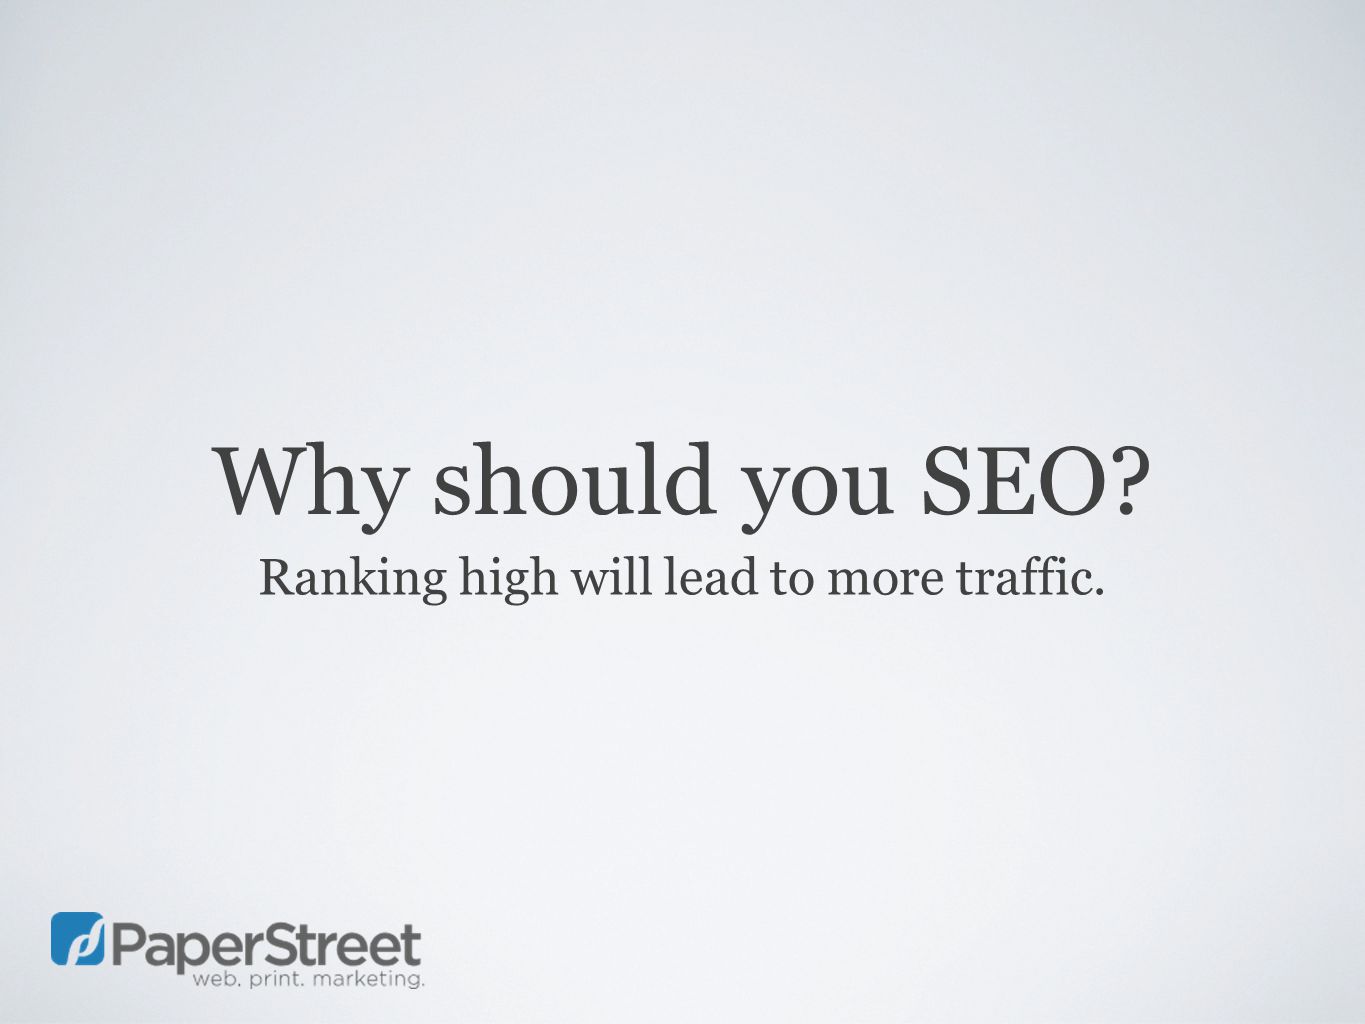 Why should you SEO Ranking high will lead to more traffic.